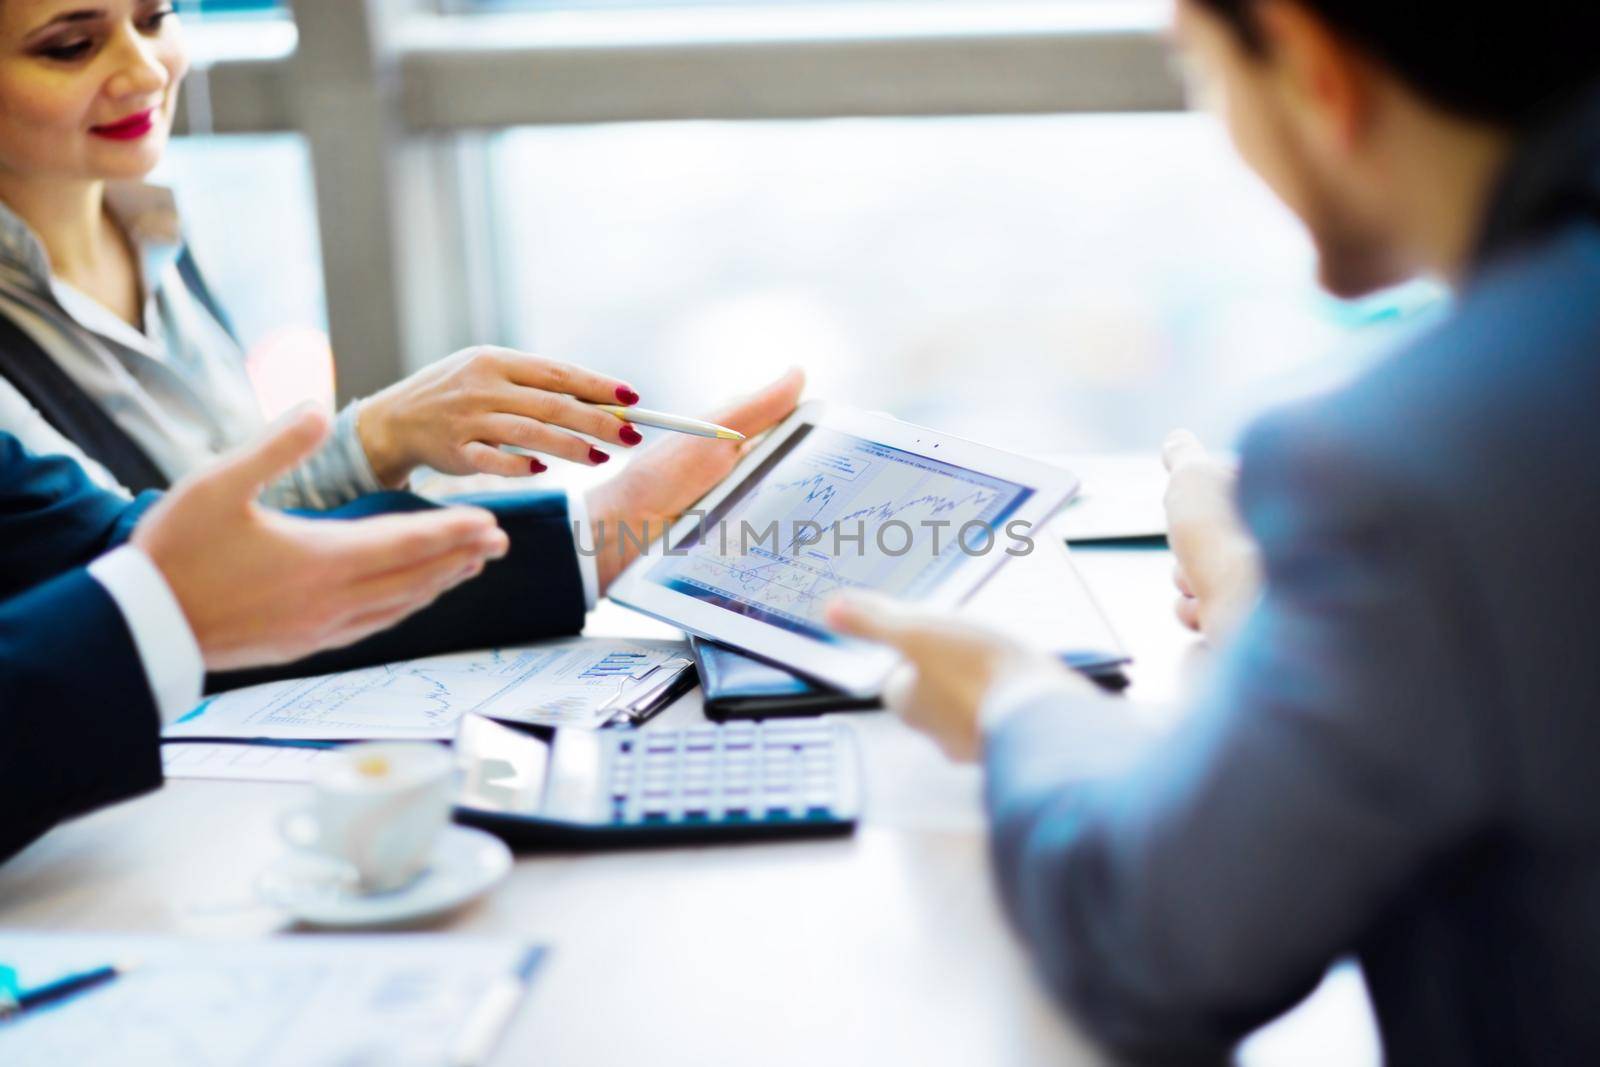 Image of human hand pointing at touchscreen in working environment at meeting by SmartPhotoLab